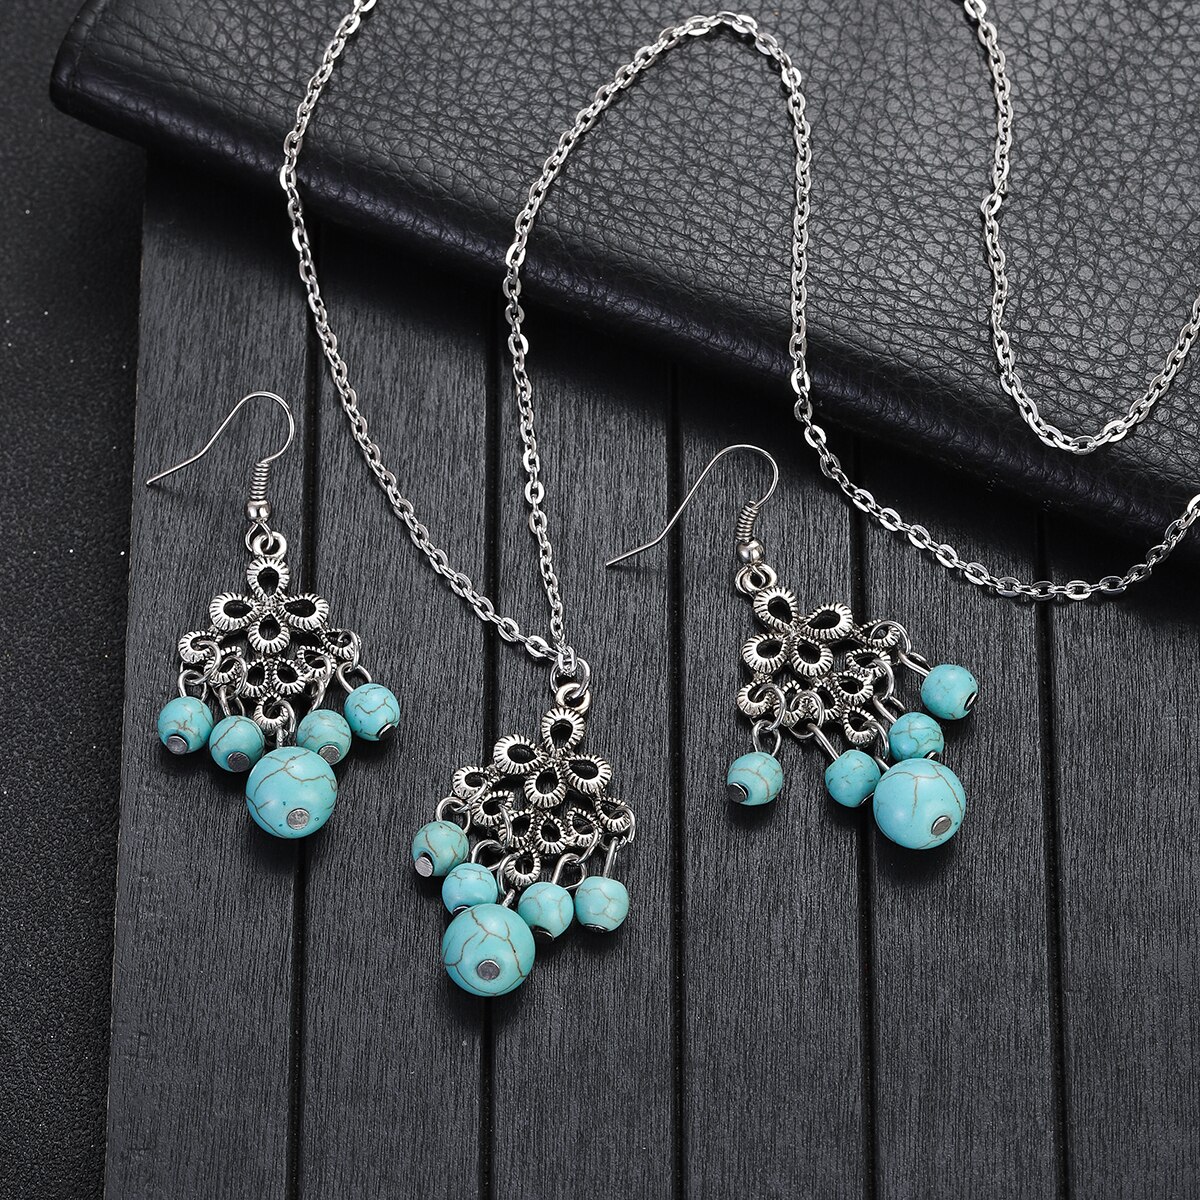 Ethnic-Boho-Blue-Stone-Tassel-Jewelry-Set-Charm-Ladies-Vintage-Jewelry-Silver-Color-Hollow-Flower-Ch-1005005134002231-5